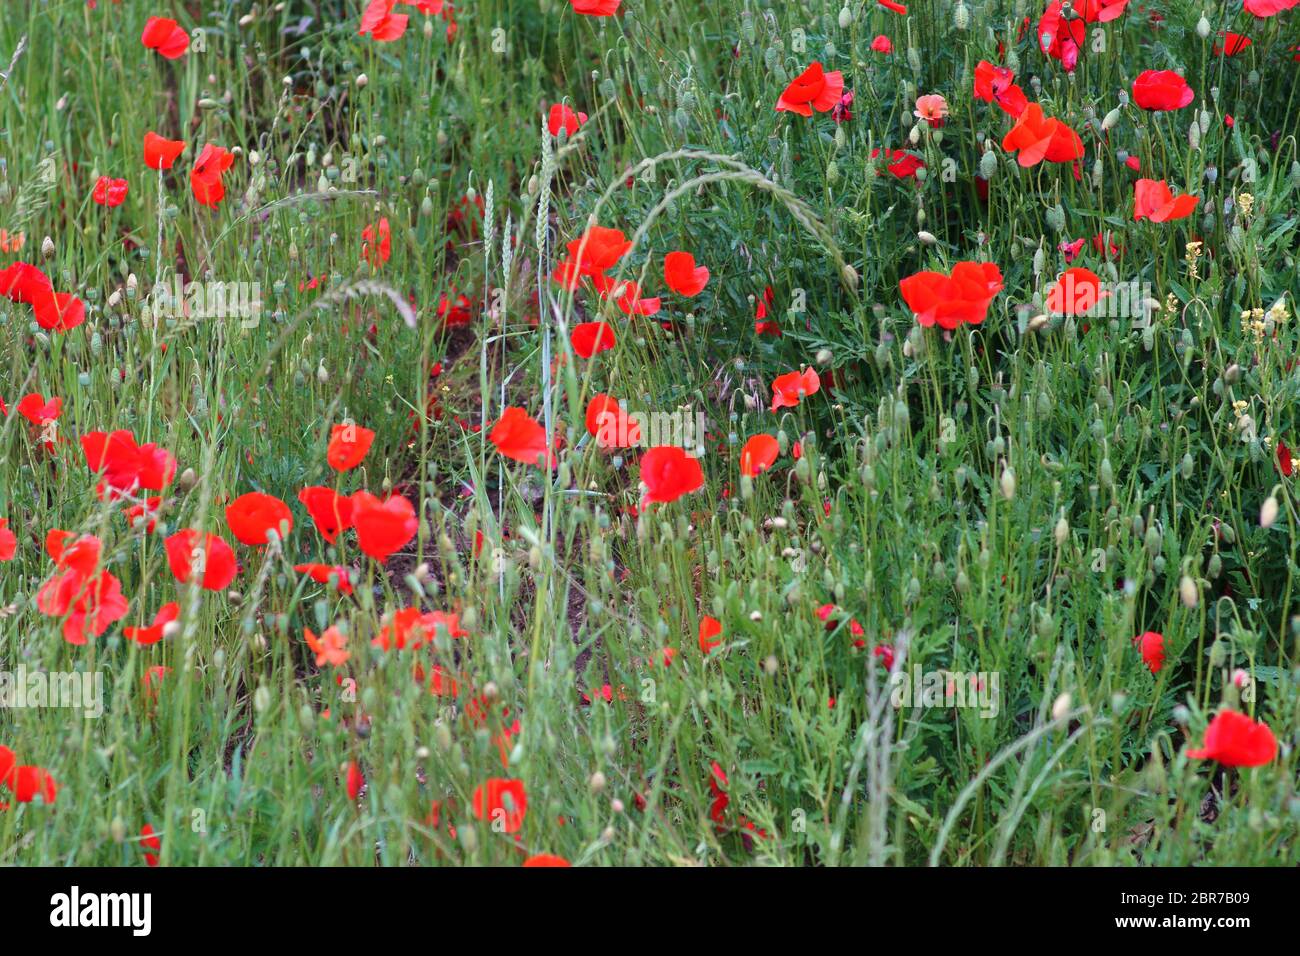 Bright red poppy flowers on the edge of a field, surrounded by grass. Stock Photo